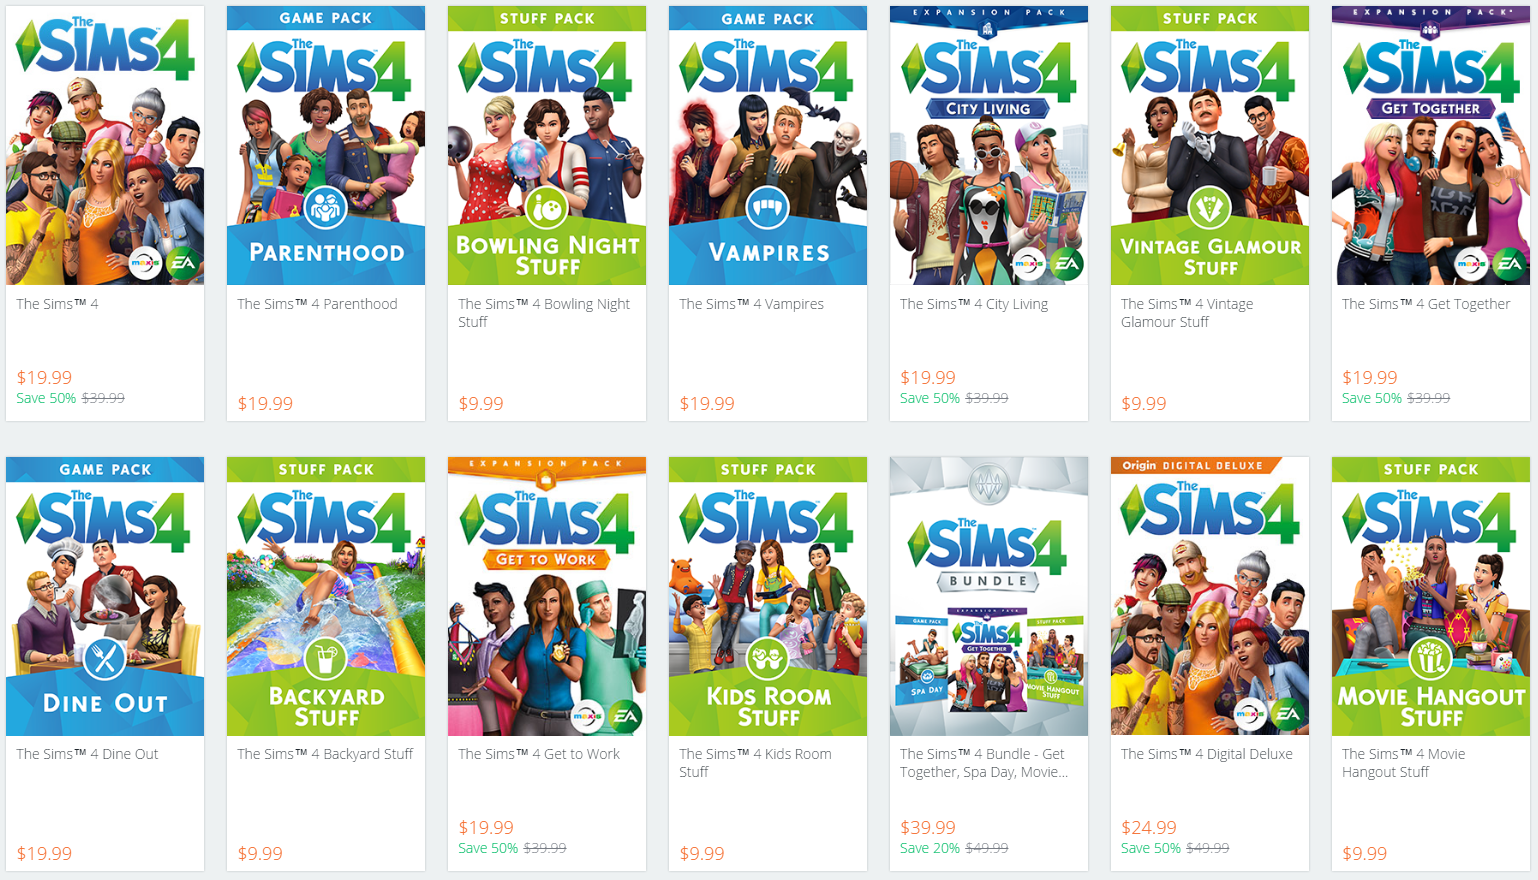 Sale: Save 50% on Select Sims 4 Titles